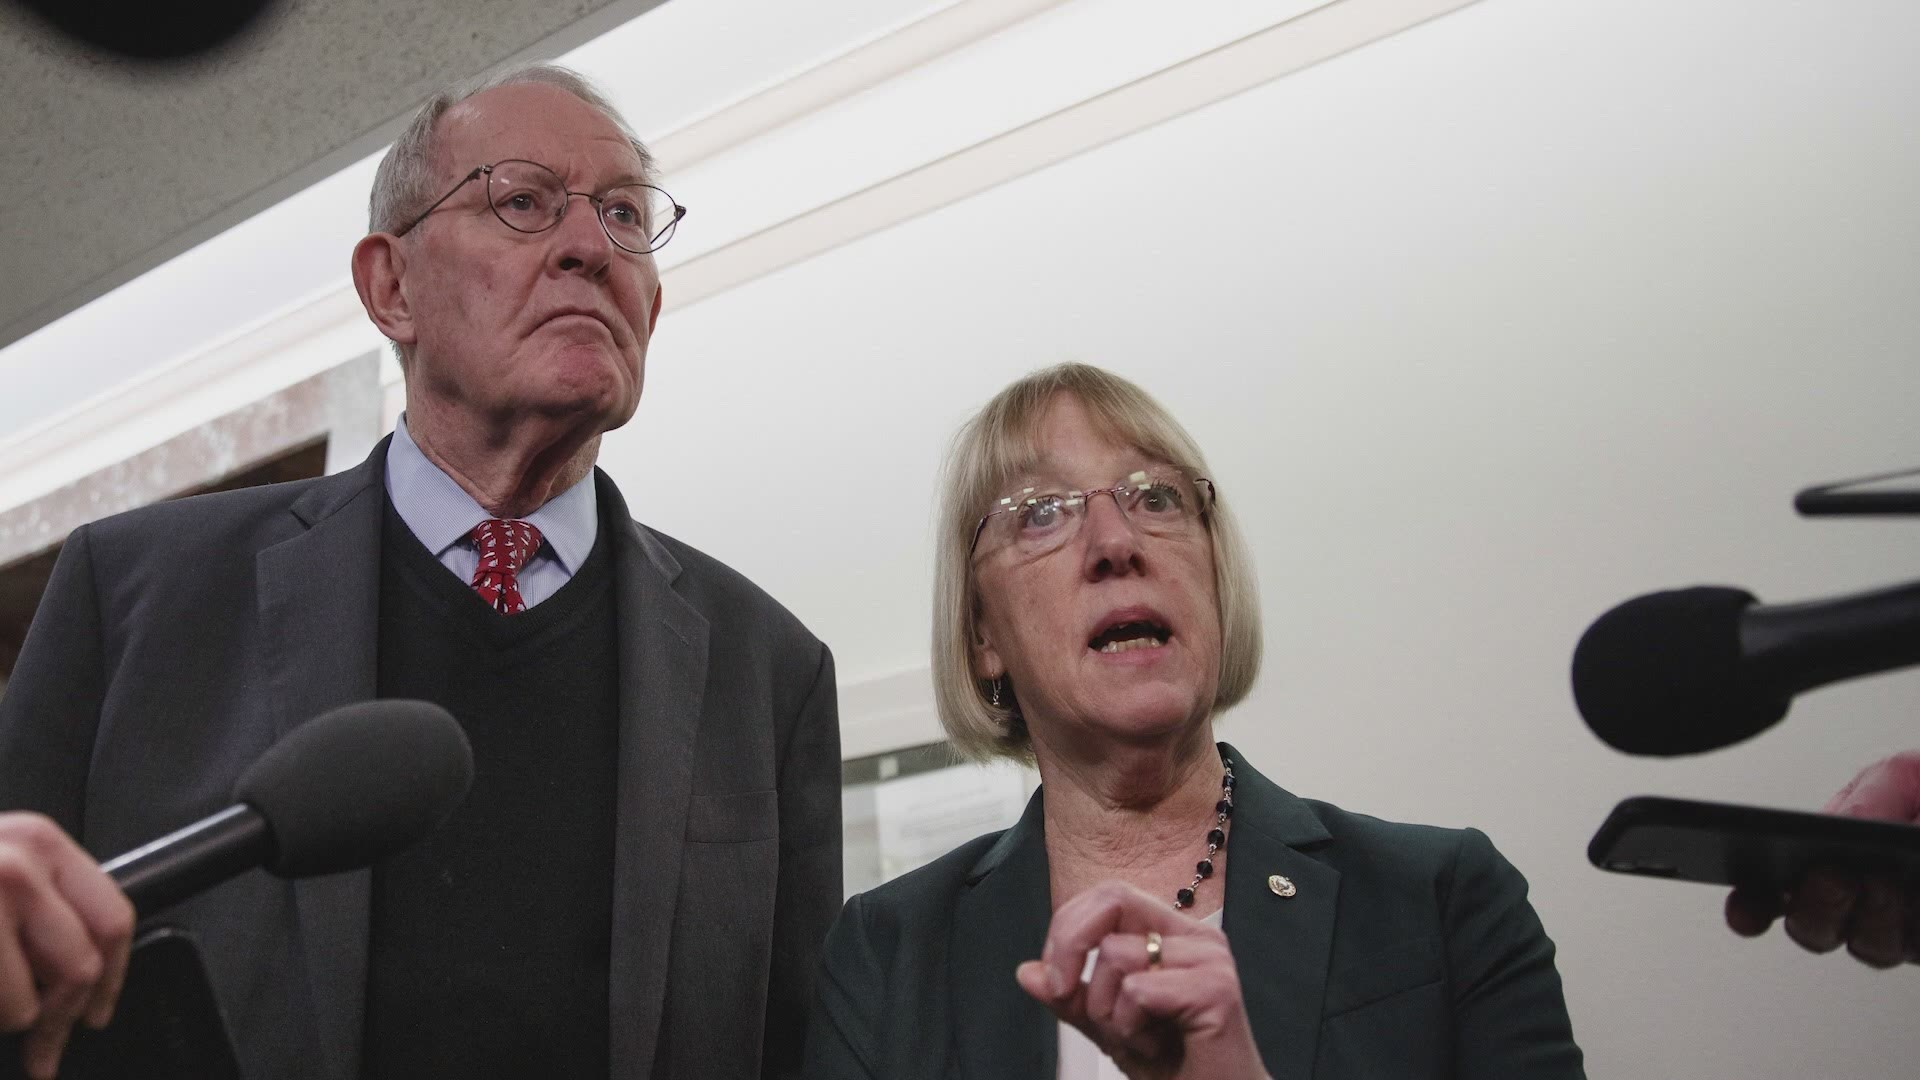 Sen. Patty Murray plans to run for re-election in 2022, but a statewide poll found 47% of registered voters said she should not run again.